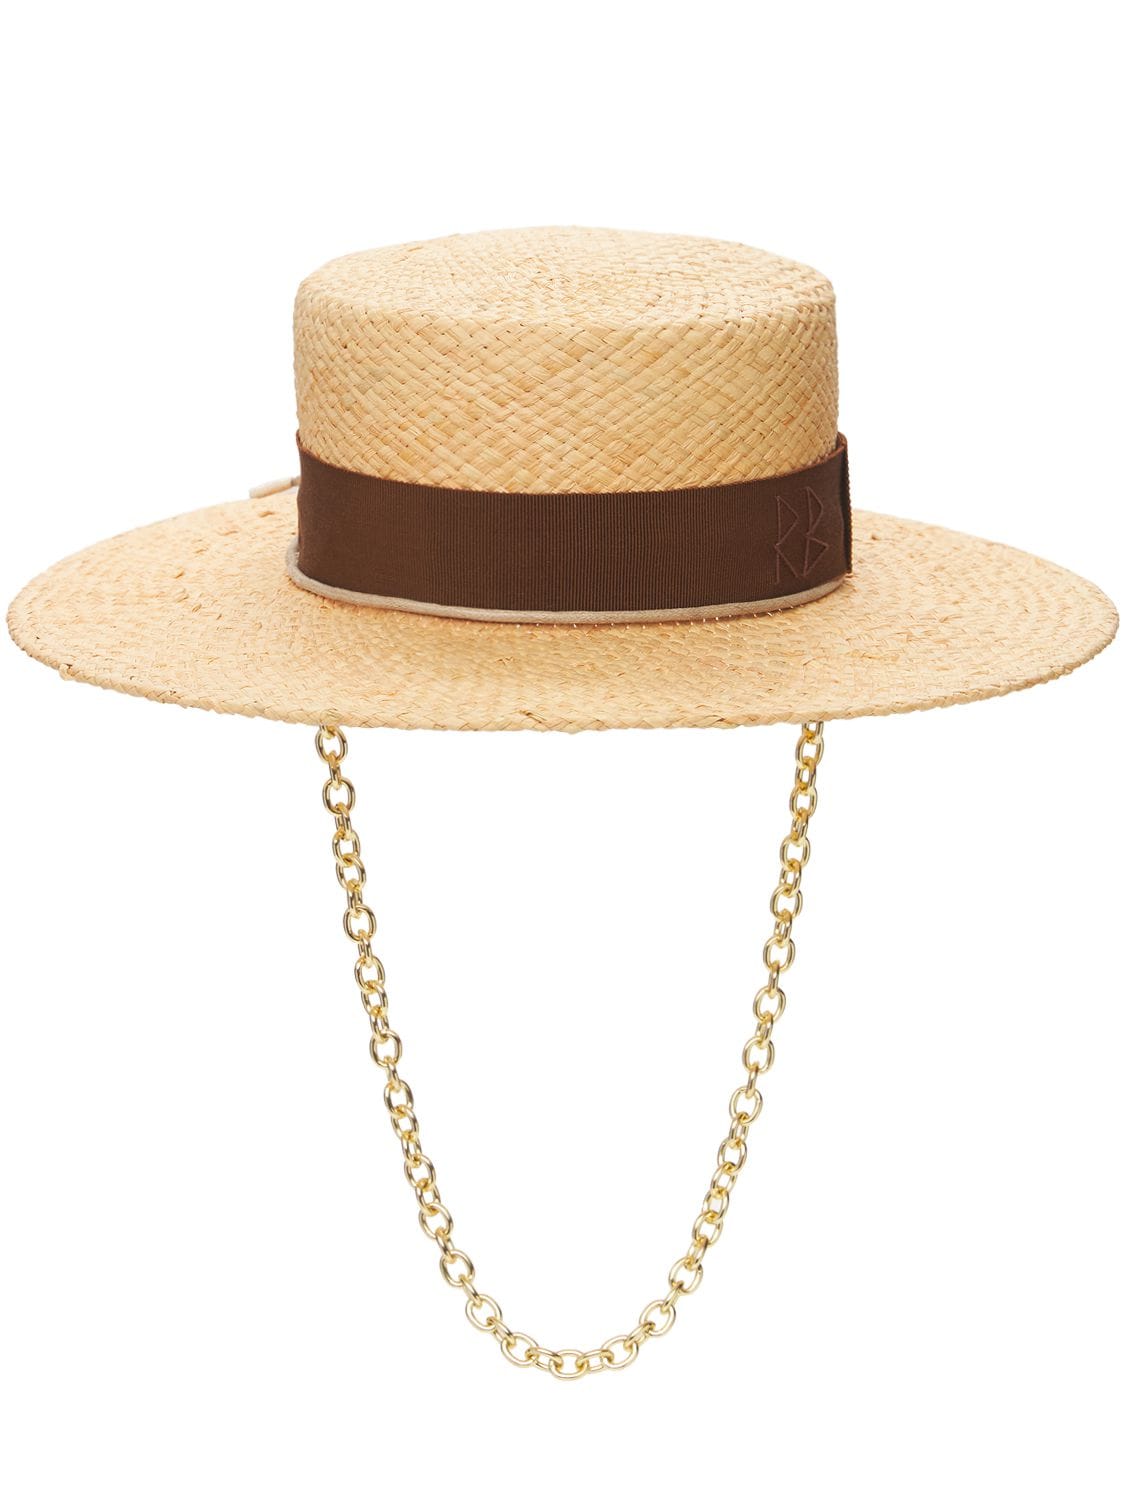 Image of Chain Strap Straw Boater Hat